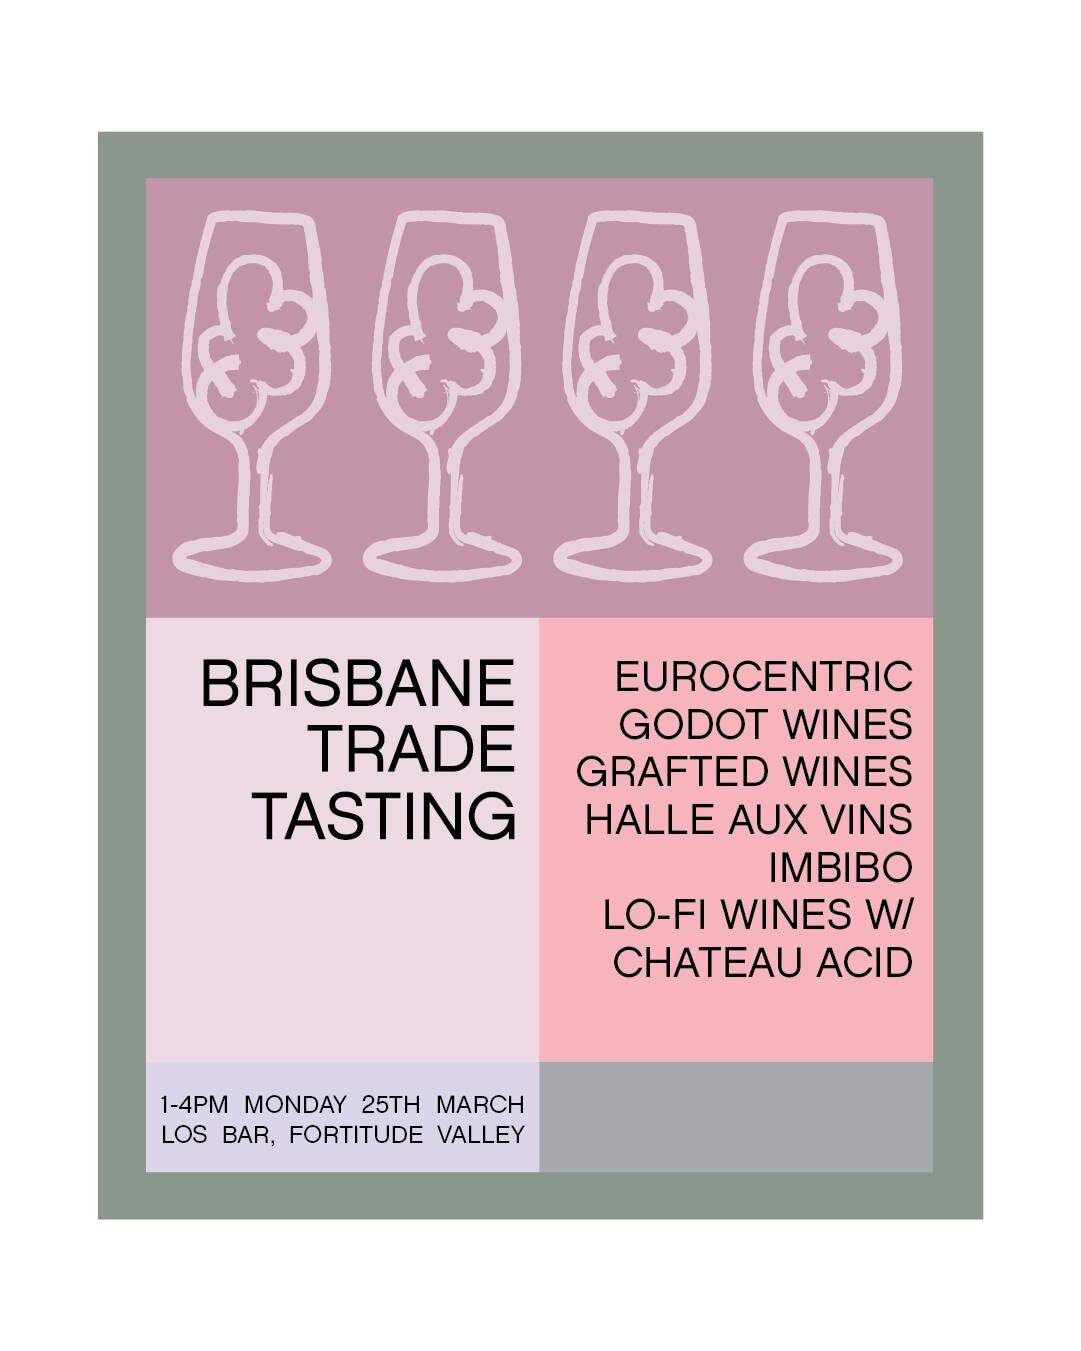 BRISBANE TRADE TASTING - We are coming up next week with these legends. Can't wait to see you there! 

We will be pouring some of our latest imports including wines from Boris Champy, Domaine Champalou, Dominique Hauvette and our latest addition Fran